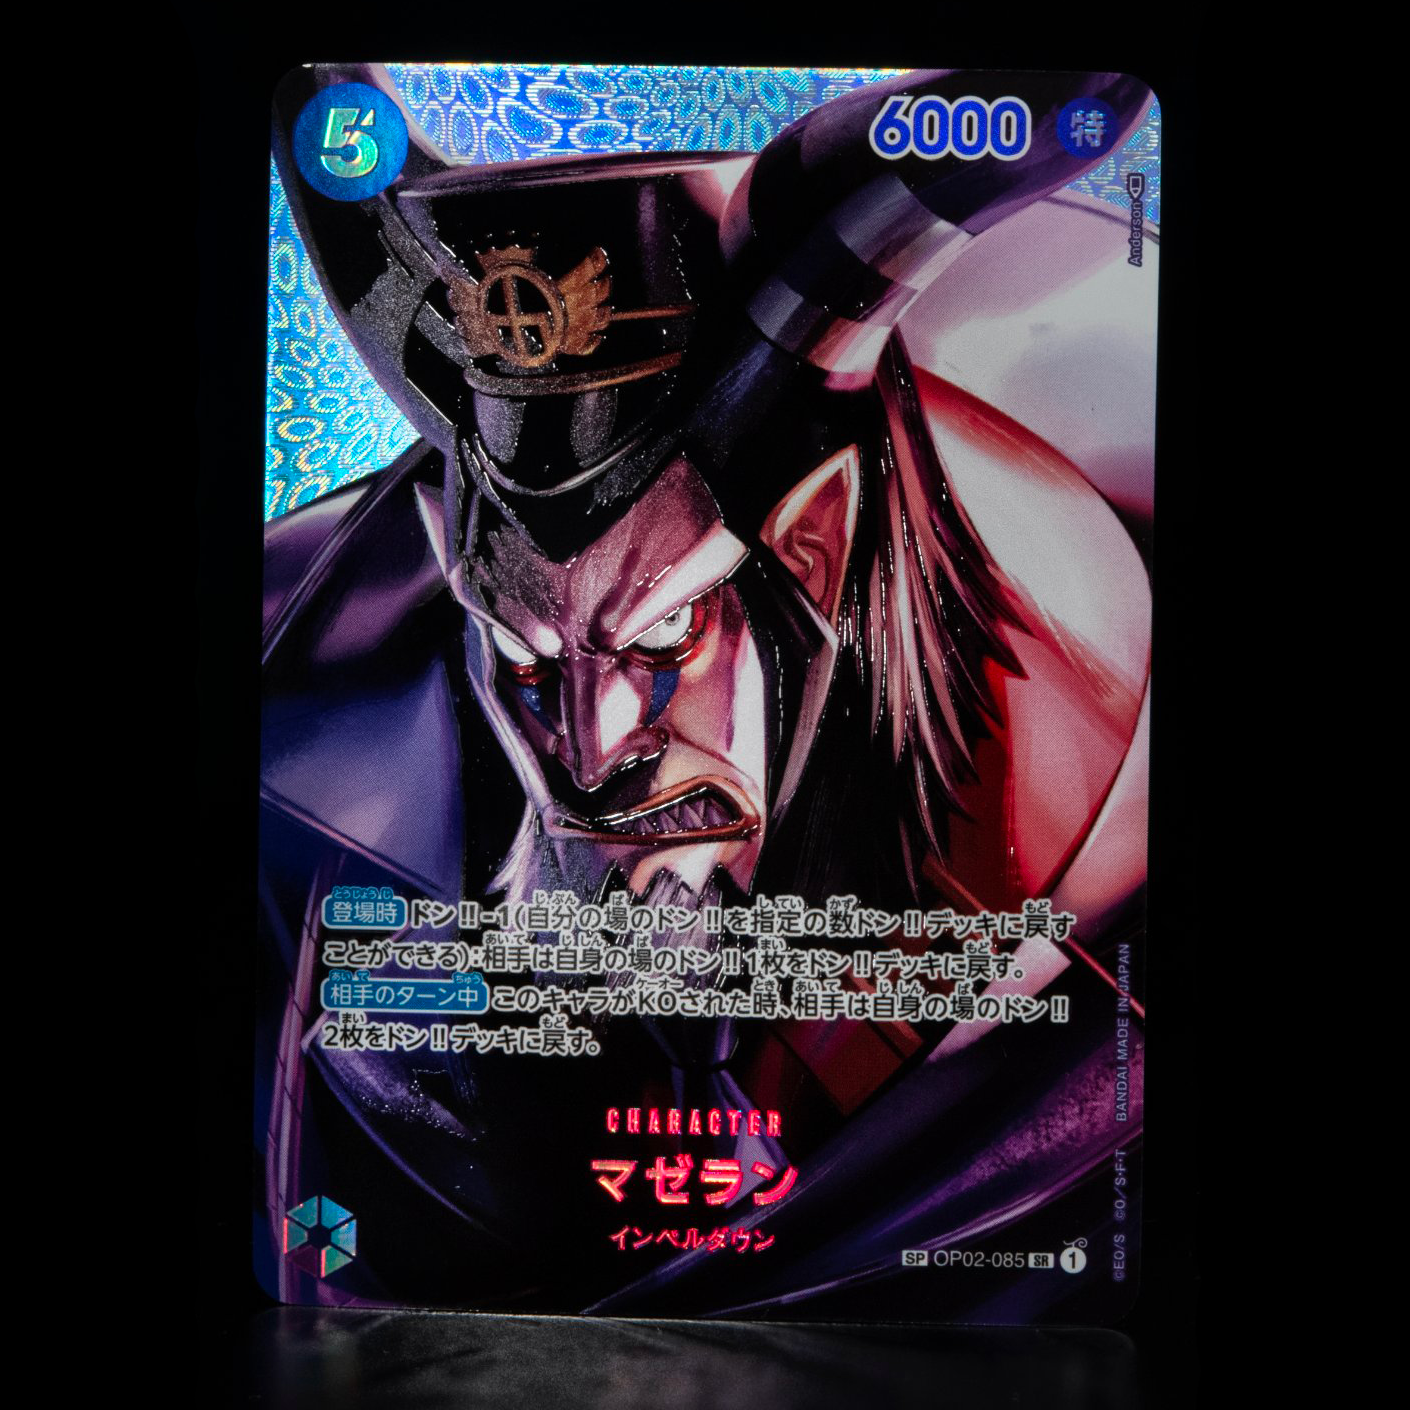 ONE PIECE CARD GAME ｢Kingdoms of Intrigue｣  ONE PIECE CARD GAME SPECIAL OP02-085 Super Rare card  Magellan